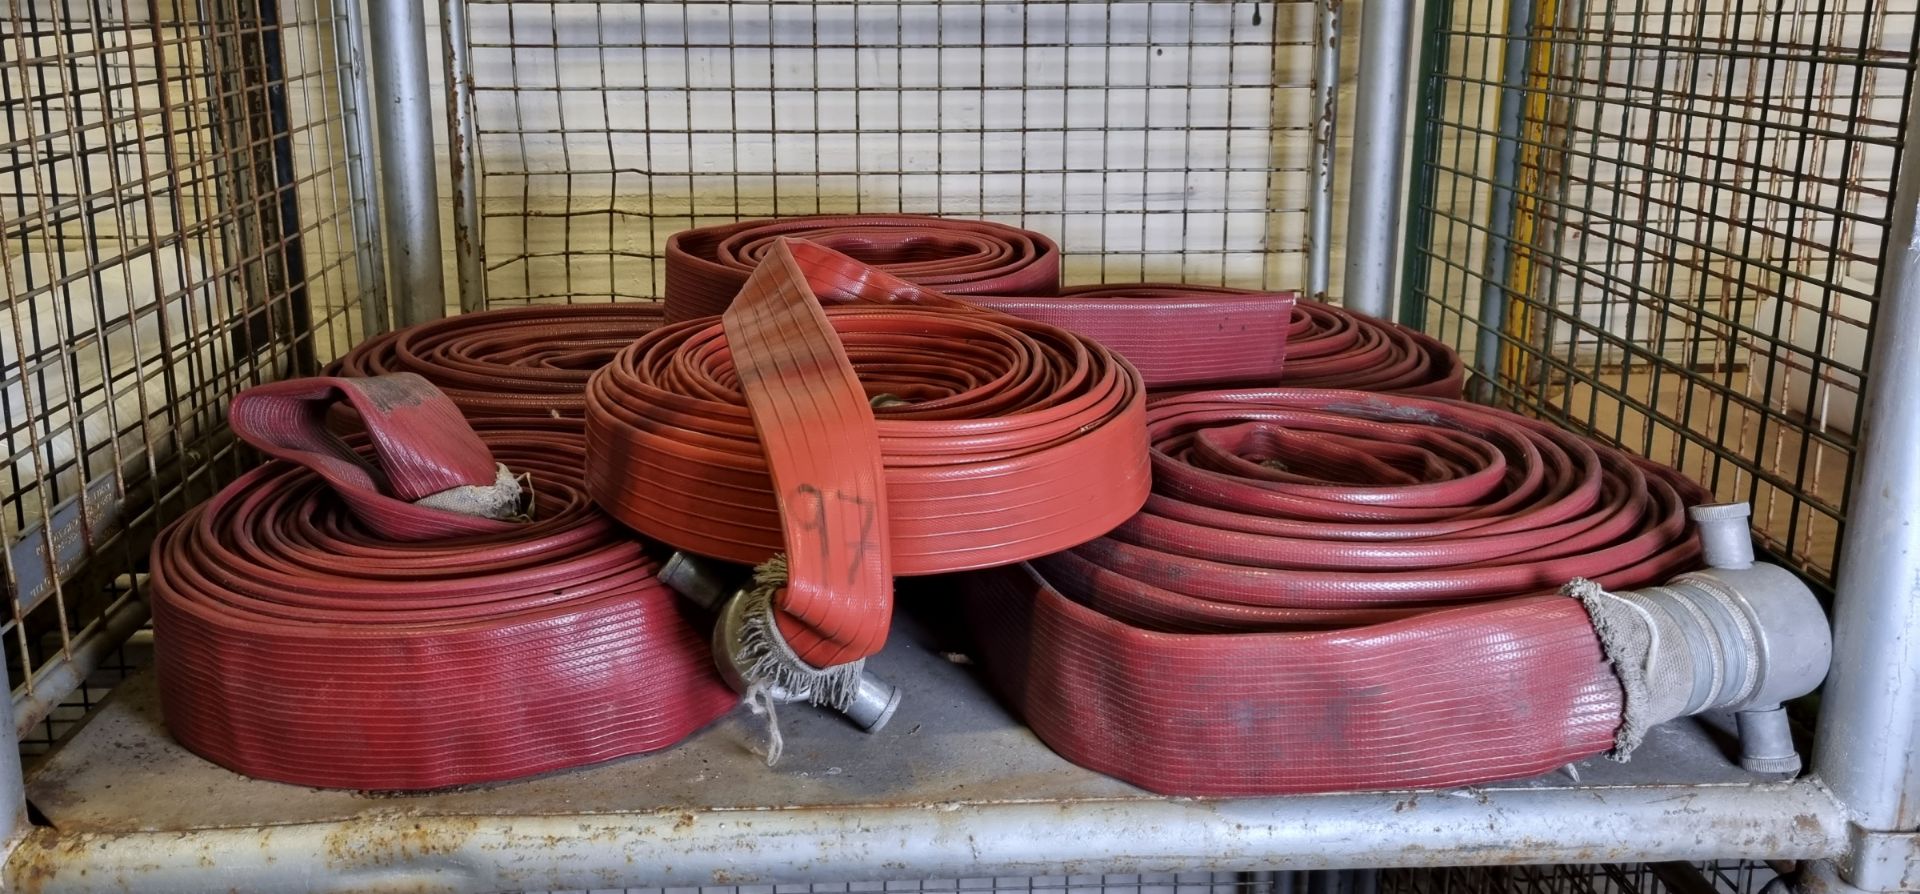 6x red layflat fire hose, mixed sizes, some missing couplings